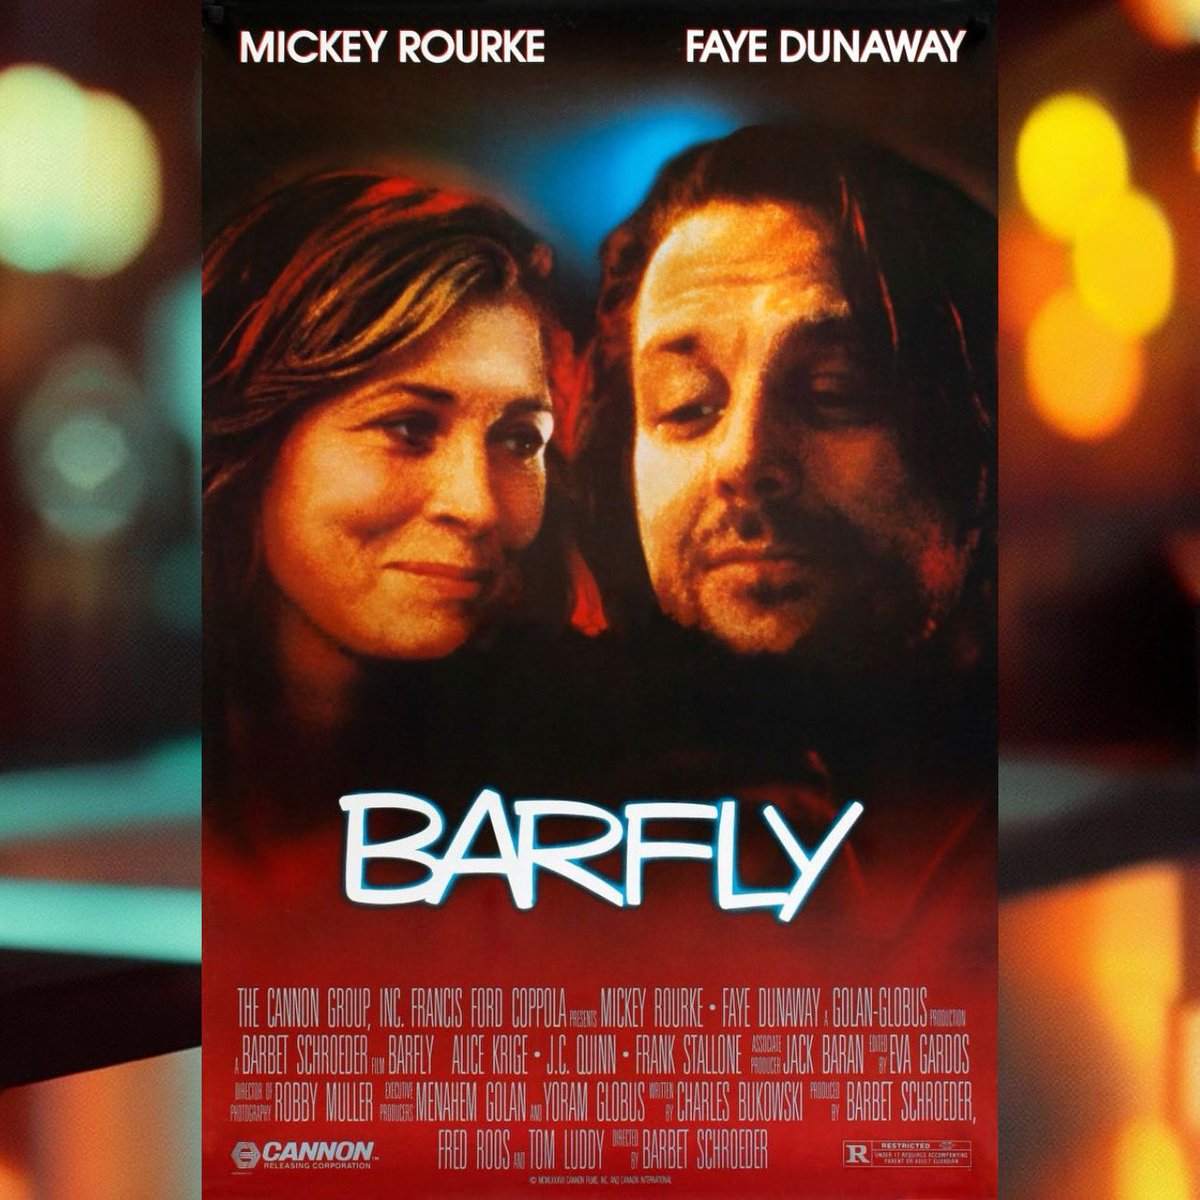 OUT NOW! 

'TO ALL MY FRIENDS!' The Cannon Bros stagger down to the local L.A. dive and cheers to 1987's BARFLY

#cannonfilms #barfly #mickeyrourke #fayedunaway #frankstallone #charlesbukowski #alicekrige #barbetschroeder #thecannoncanon